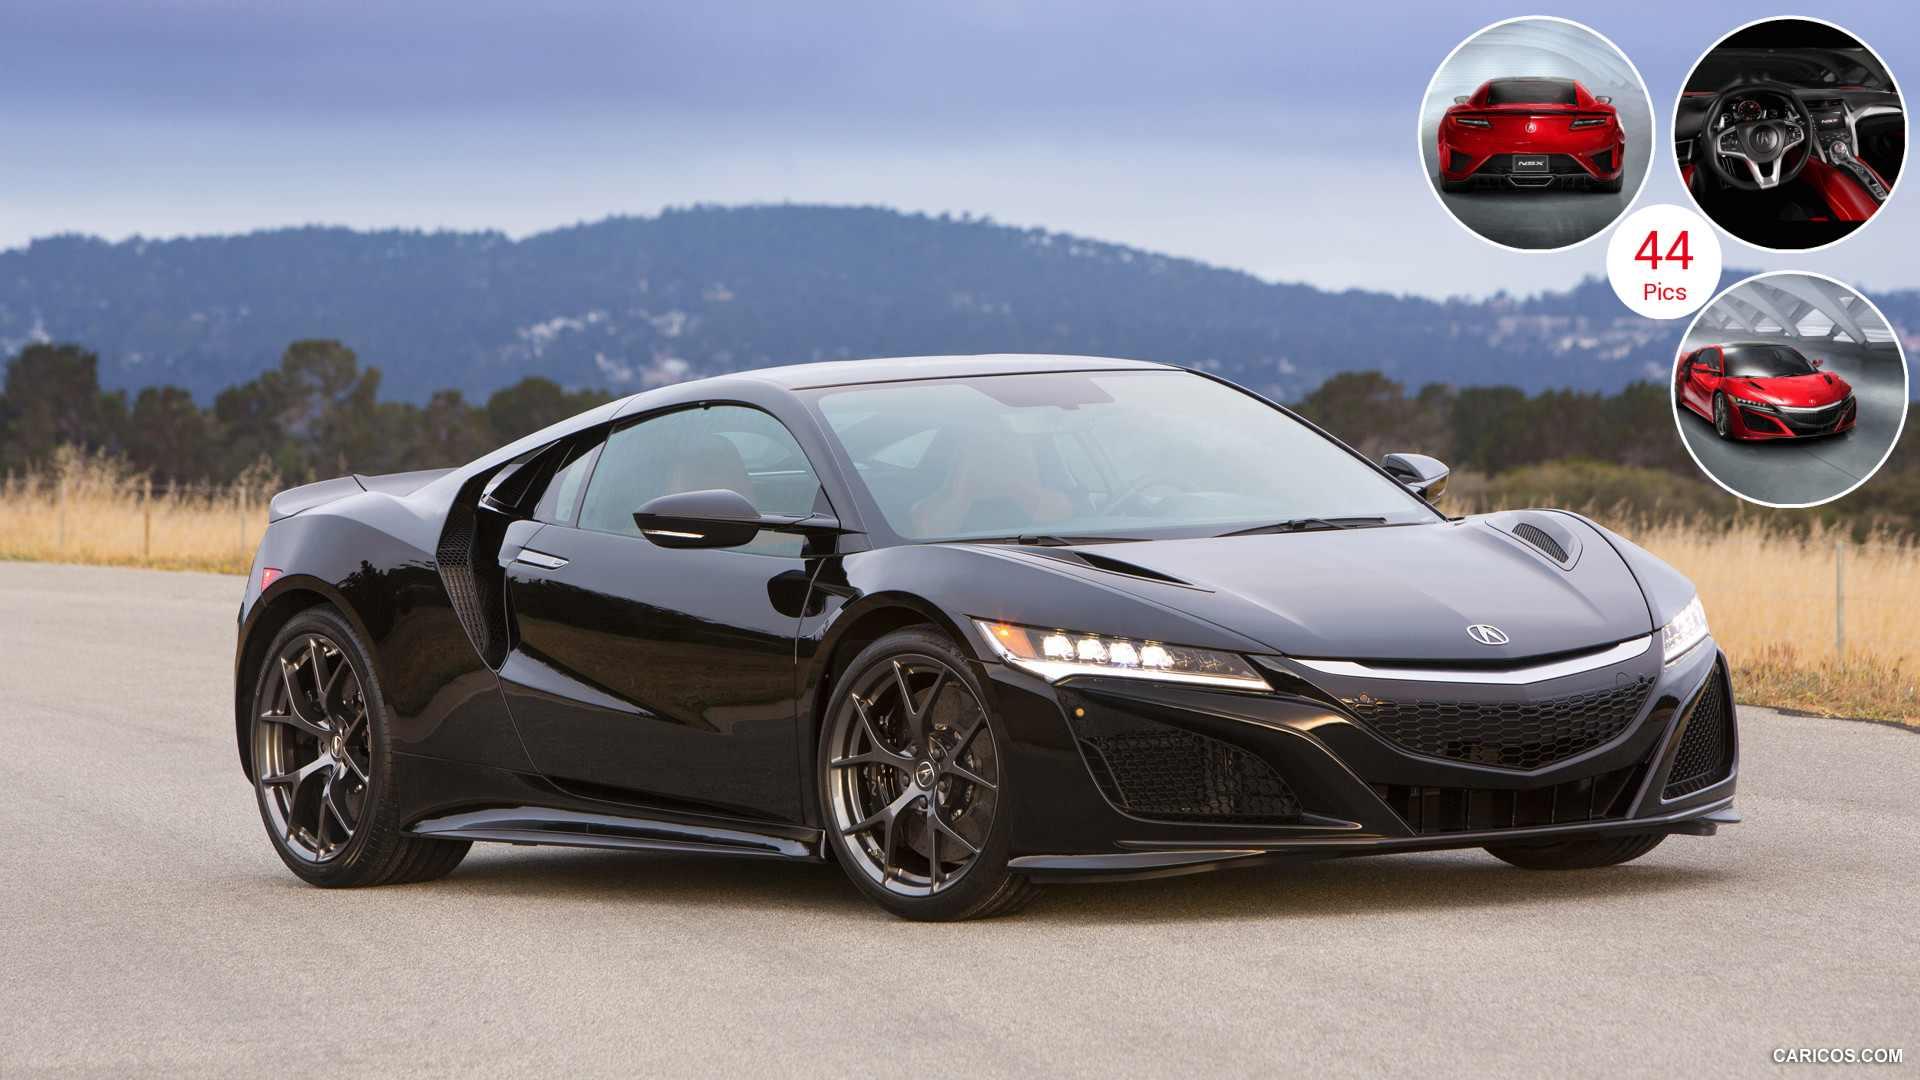 2017 Acura NSX Wallpaper For Pc